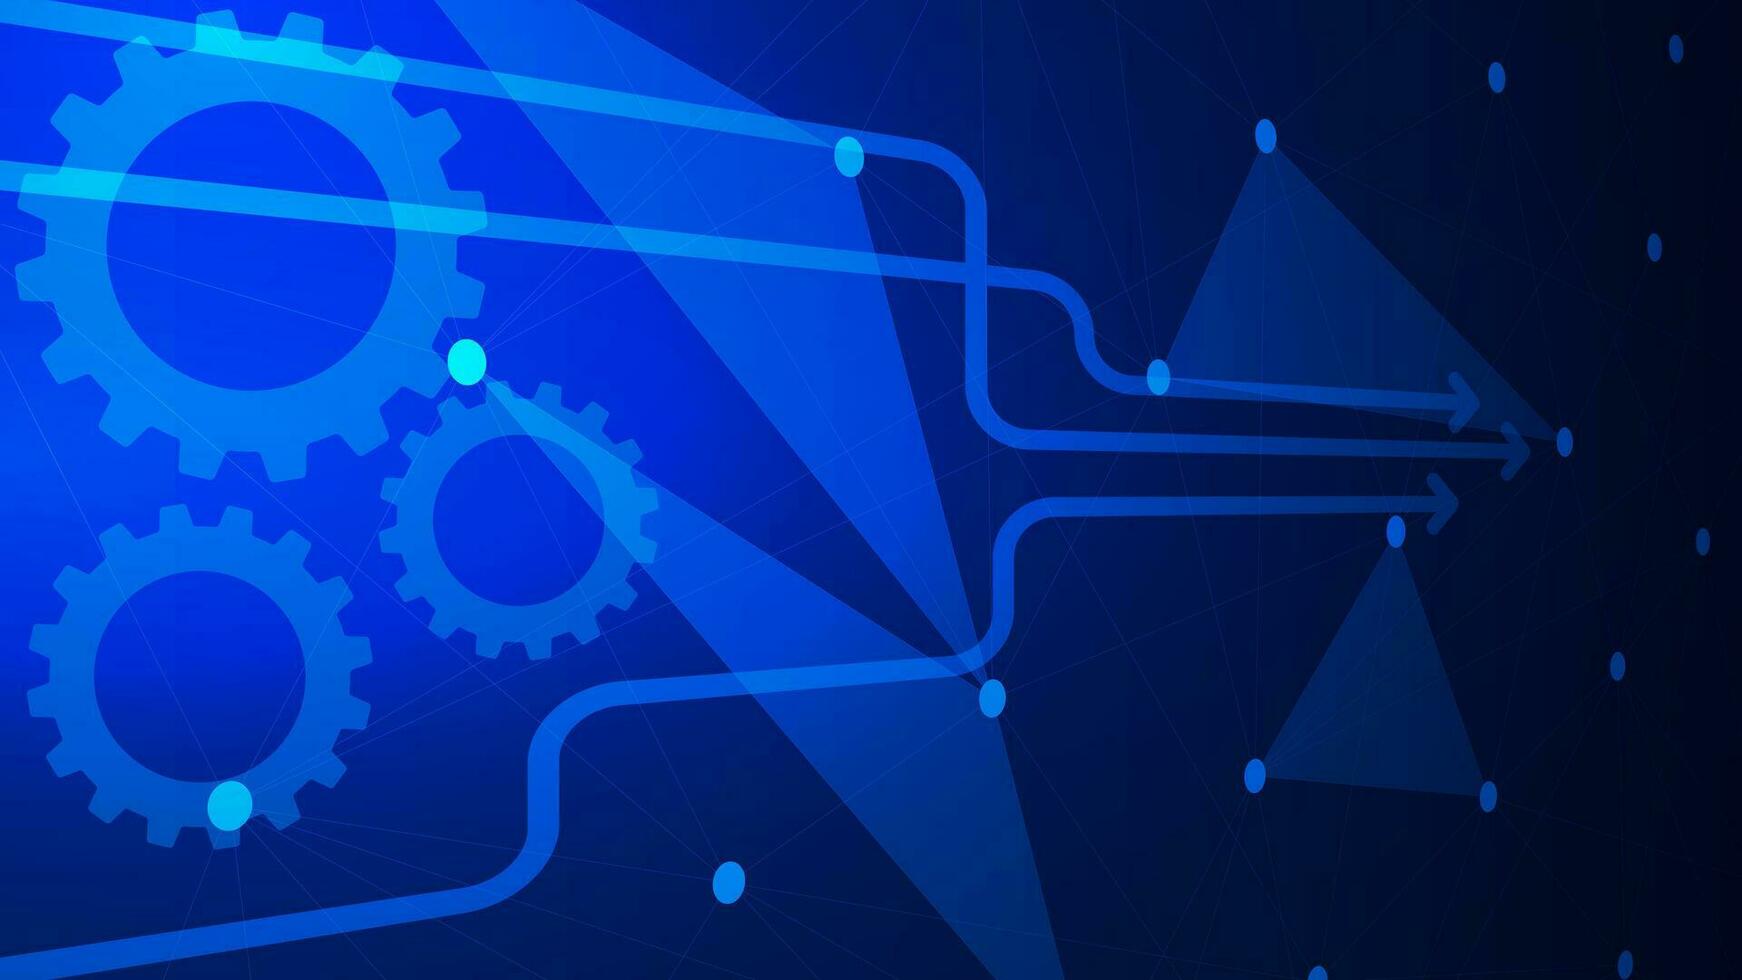 Business process management system concept with gears, arrow and plexus on dark blue background. Vector illustration.